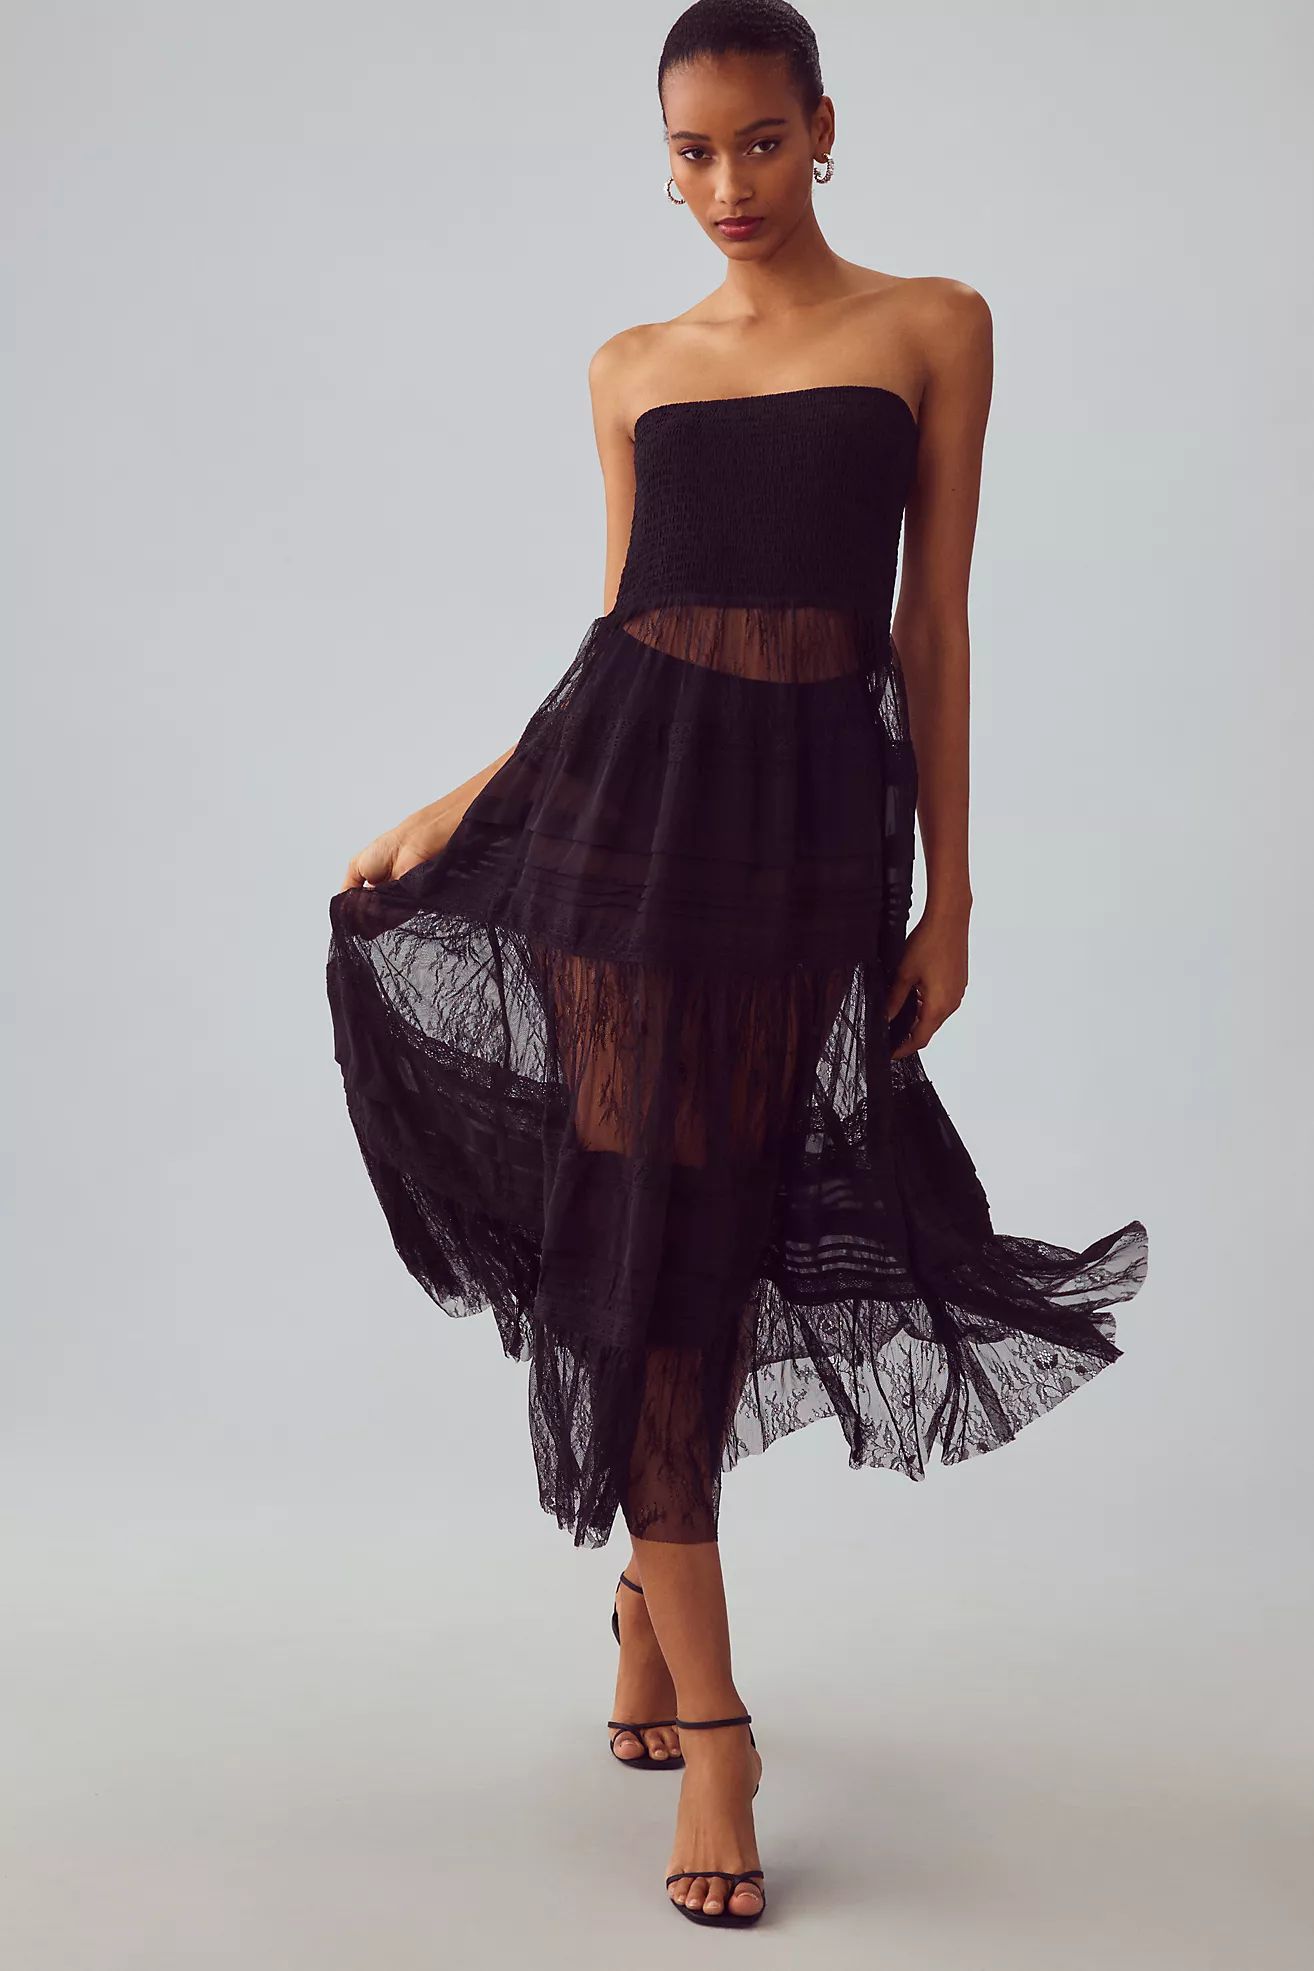 By Anthropologie Smocked Sheer Lace Overlay Dress | Anthropologie (US)